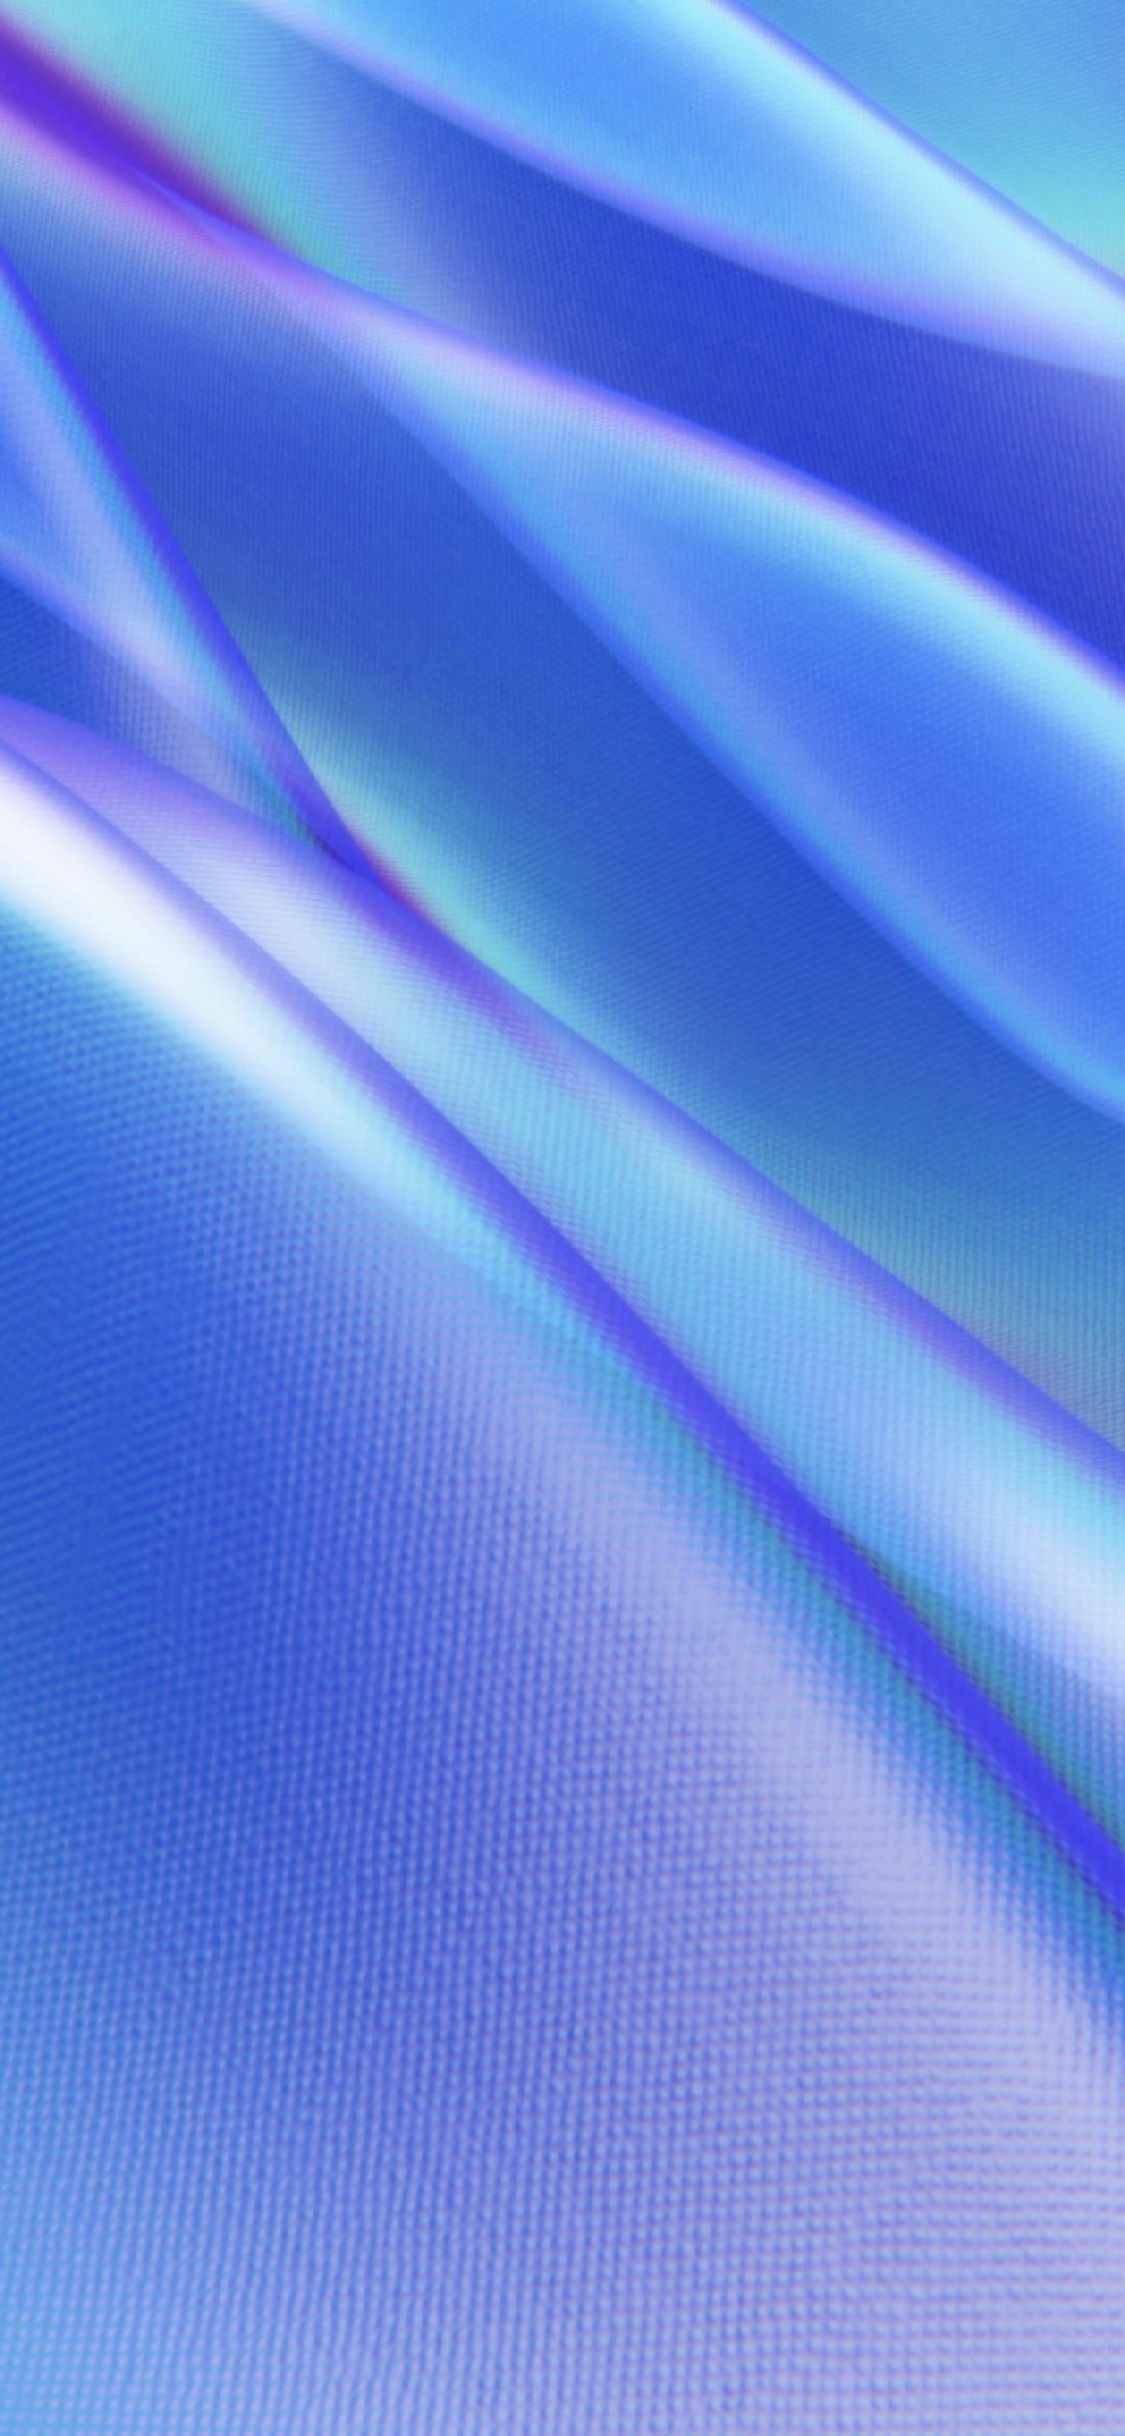 Abstract, Flow, Waves, Neon, Blue, Surface, Digital - Neon Abstract Wallpaper For Iphone X - HD Wallpaper 